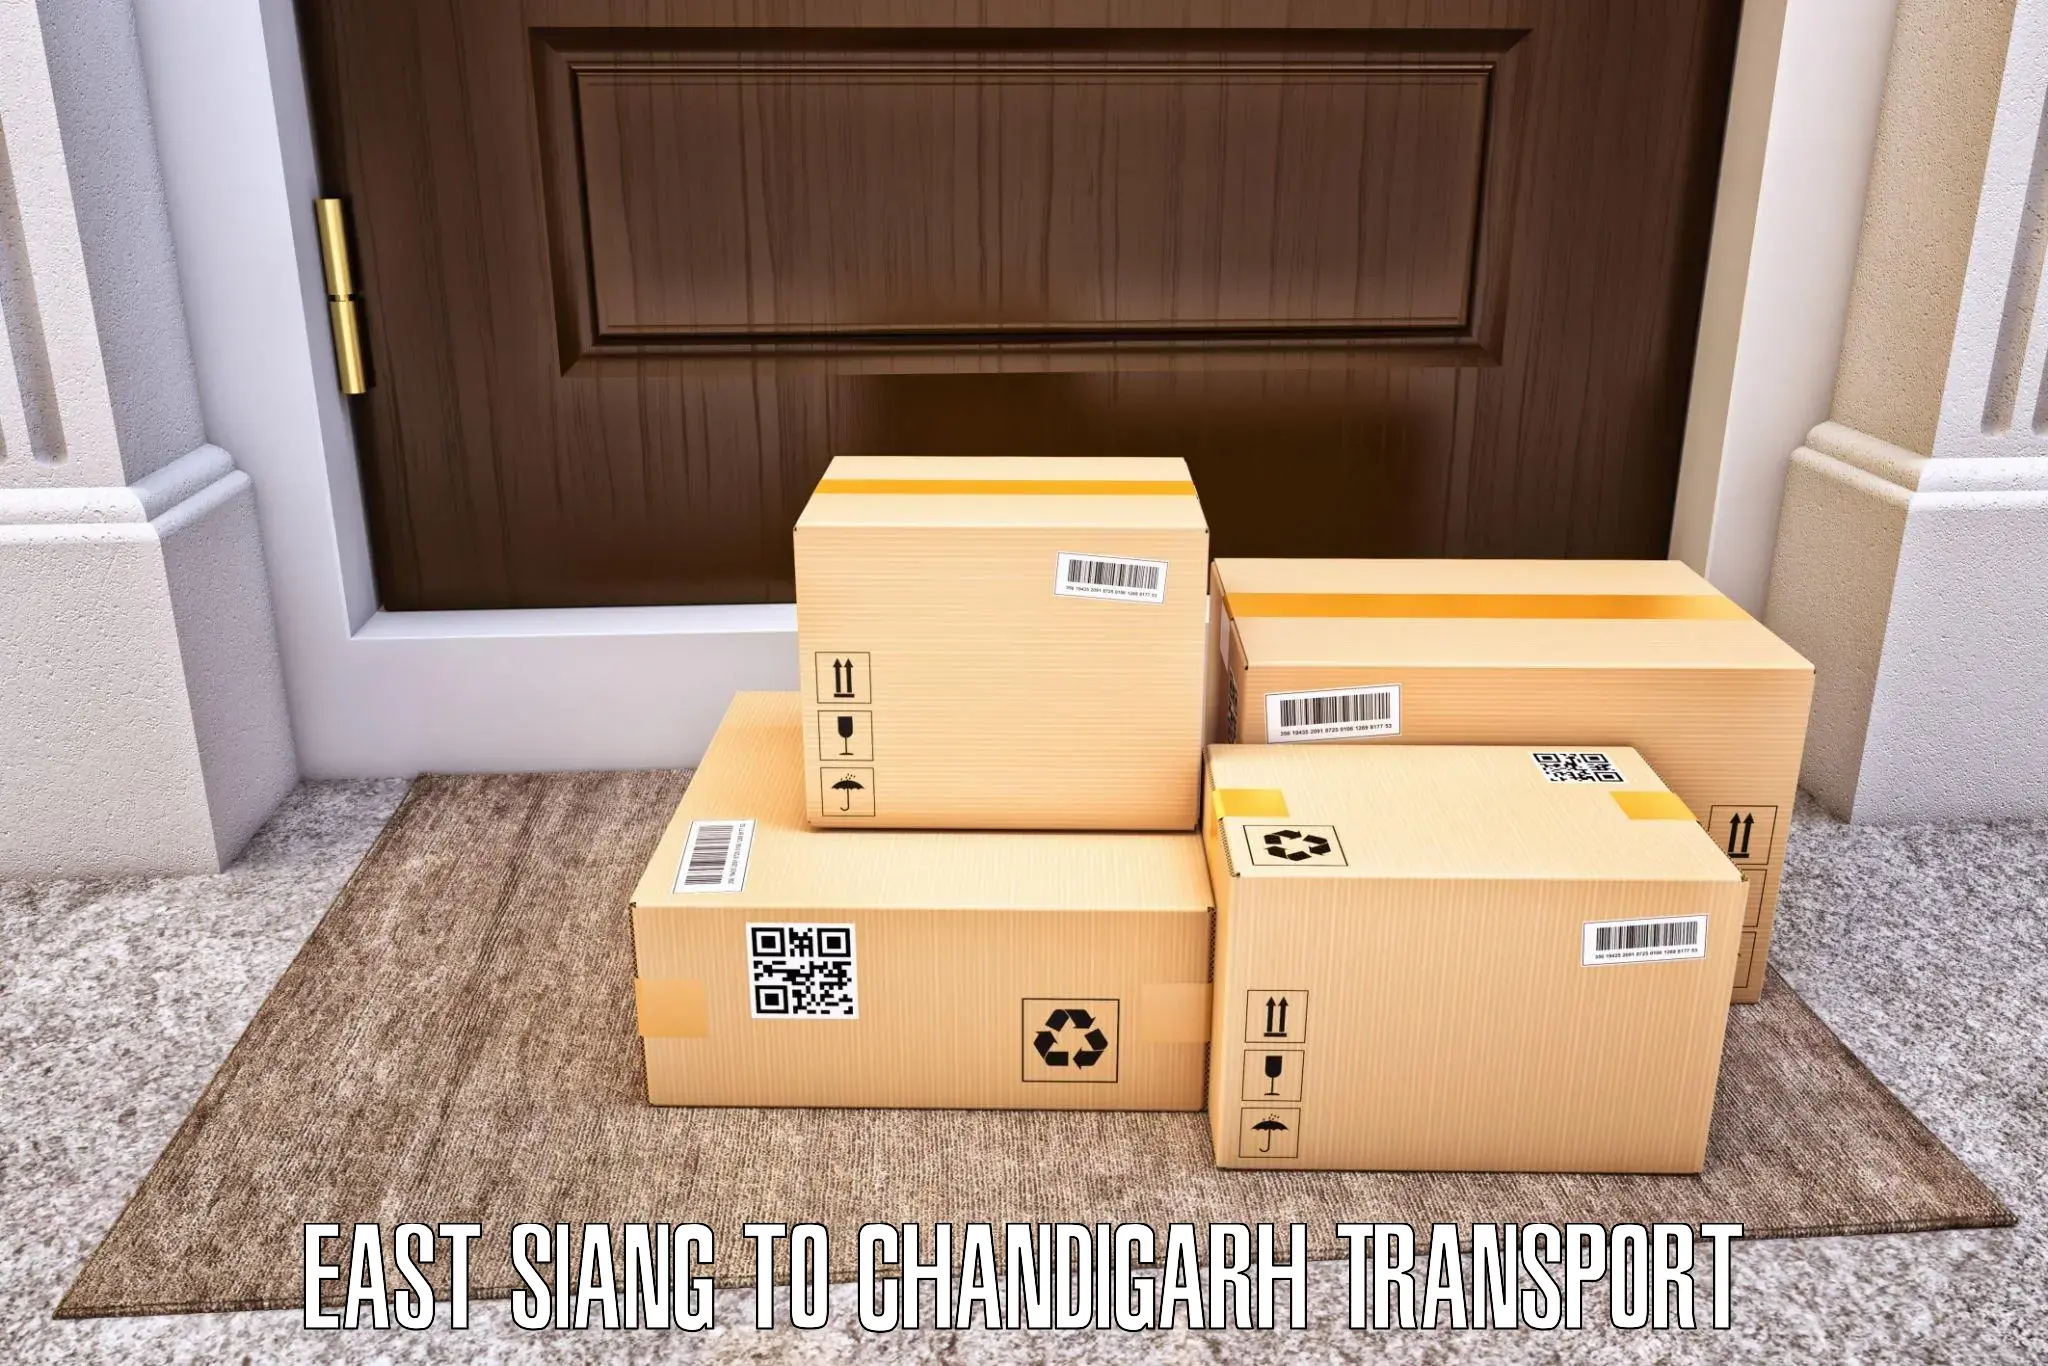 Container transport service East Siang to Chandigarh